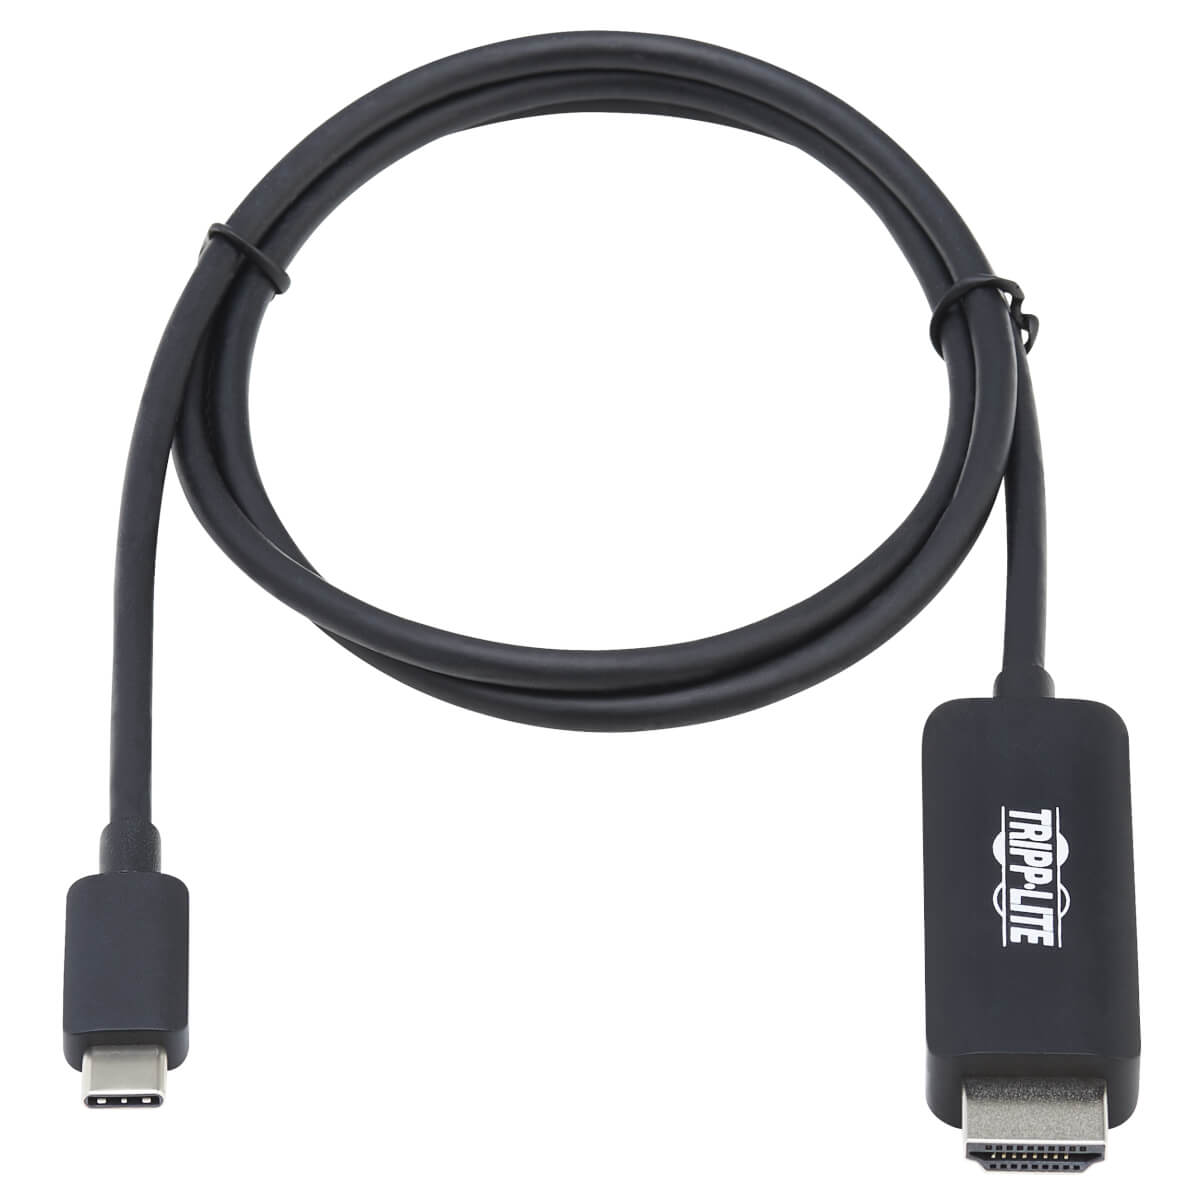 Tripp Lite U444-003-HBE USB-C to HDMI Adapter Cable (M/M), 4K, 4:4:4, Thunderbolt 3 Compatible, Black, 3 ft. - image 2 of 5